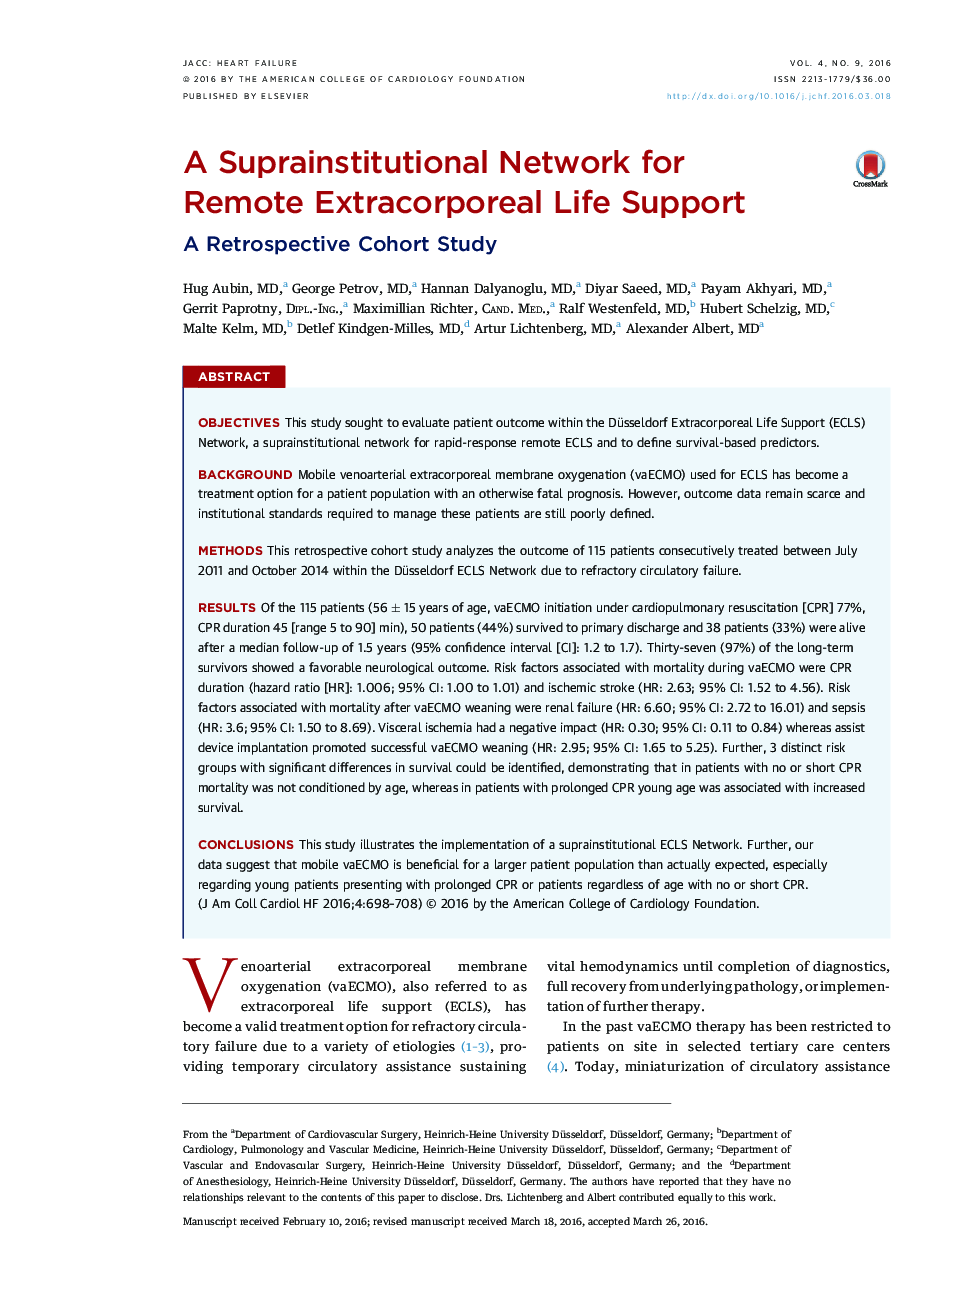 A Suprainstitutional Network for Remote Extracorporeal Life Support : A Retrospective Cohort Study